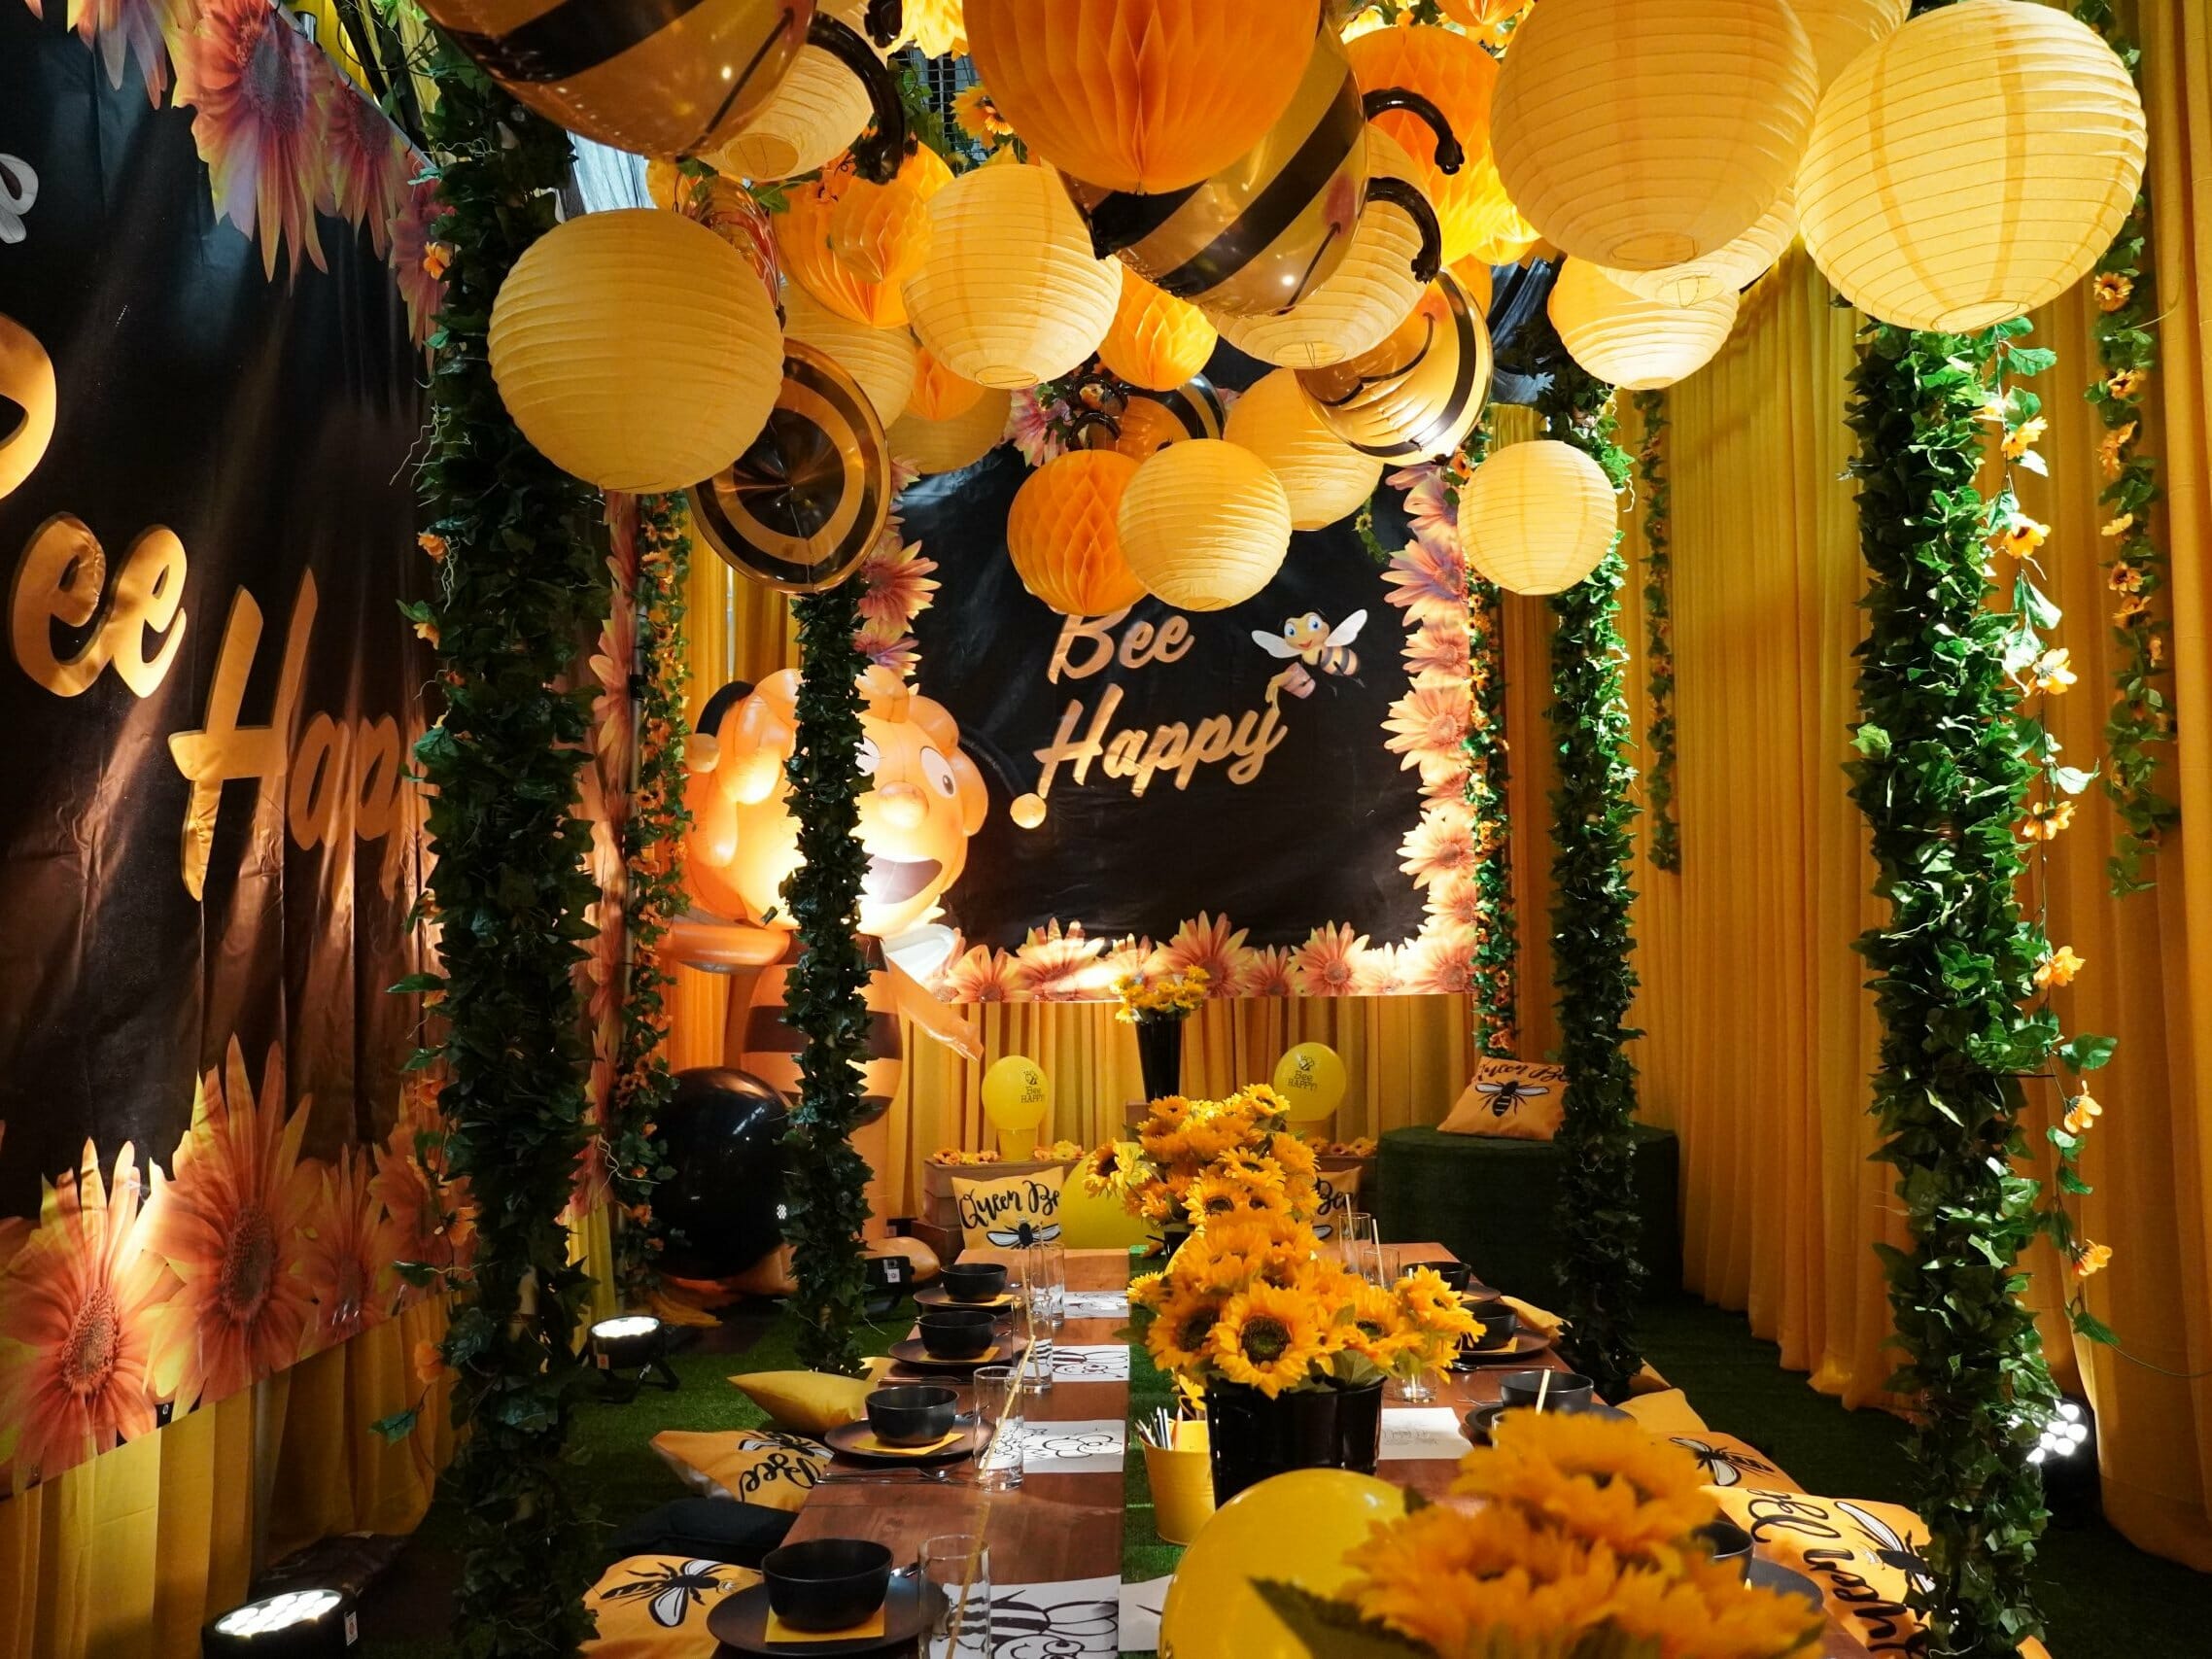 Bumble Bee Party Theme balloons, table setup, table decor and greenery